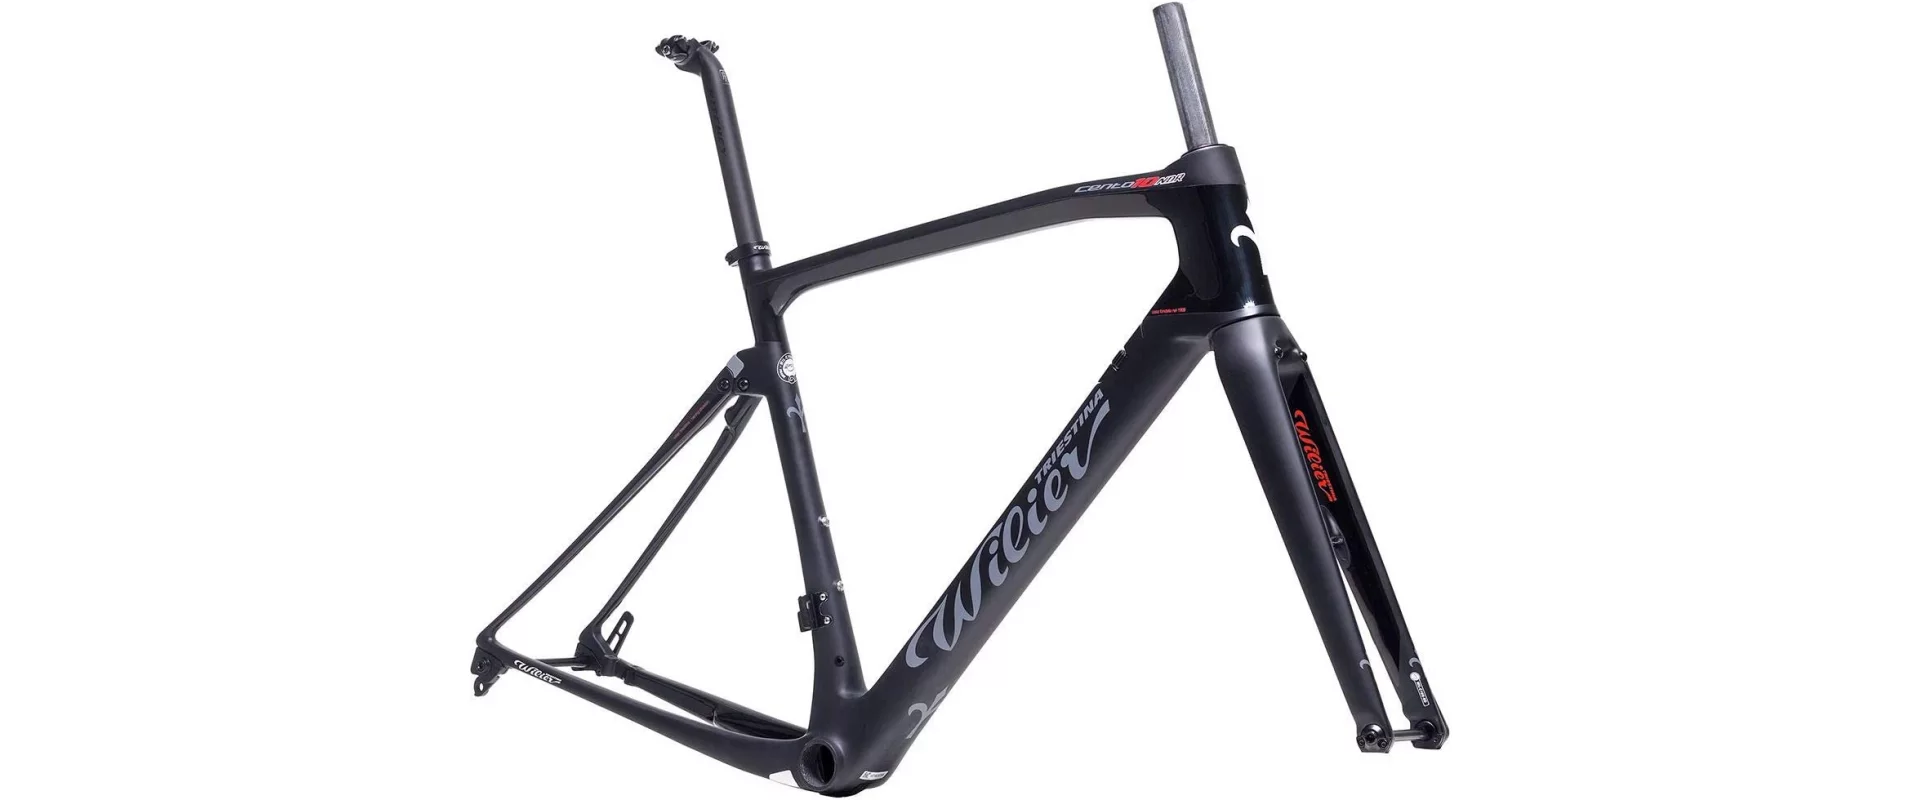 Wilier Cento10NDR Disc / Рама / 2021 фото 1